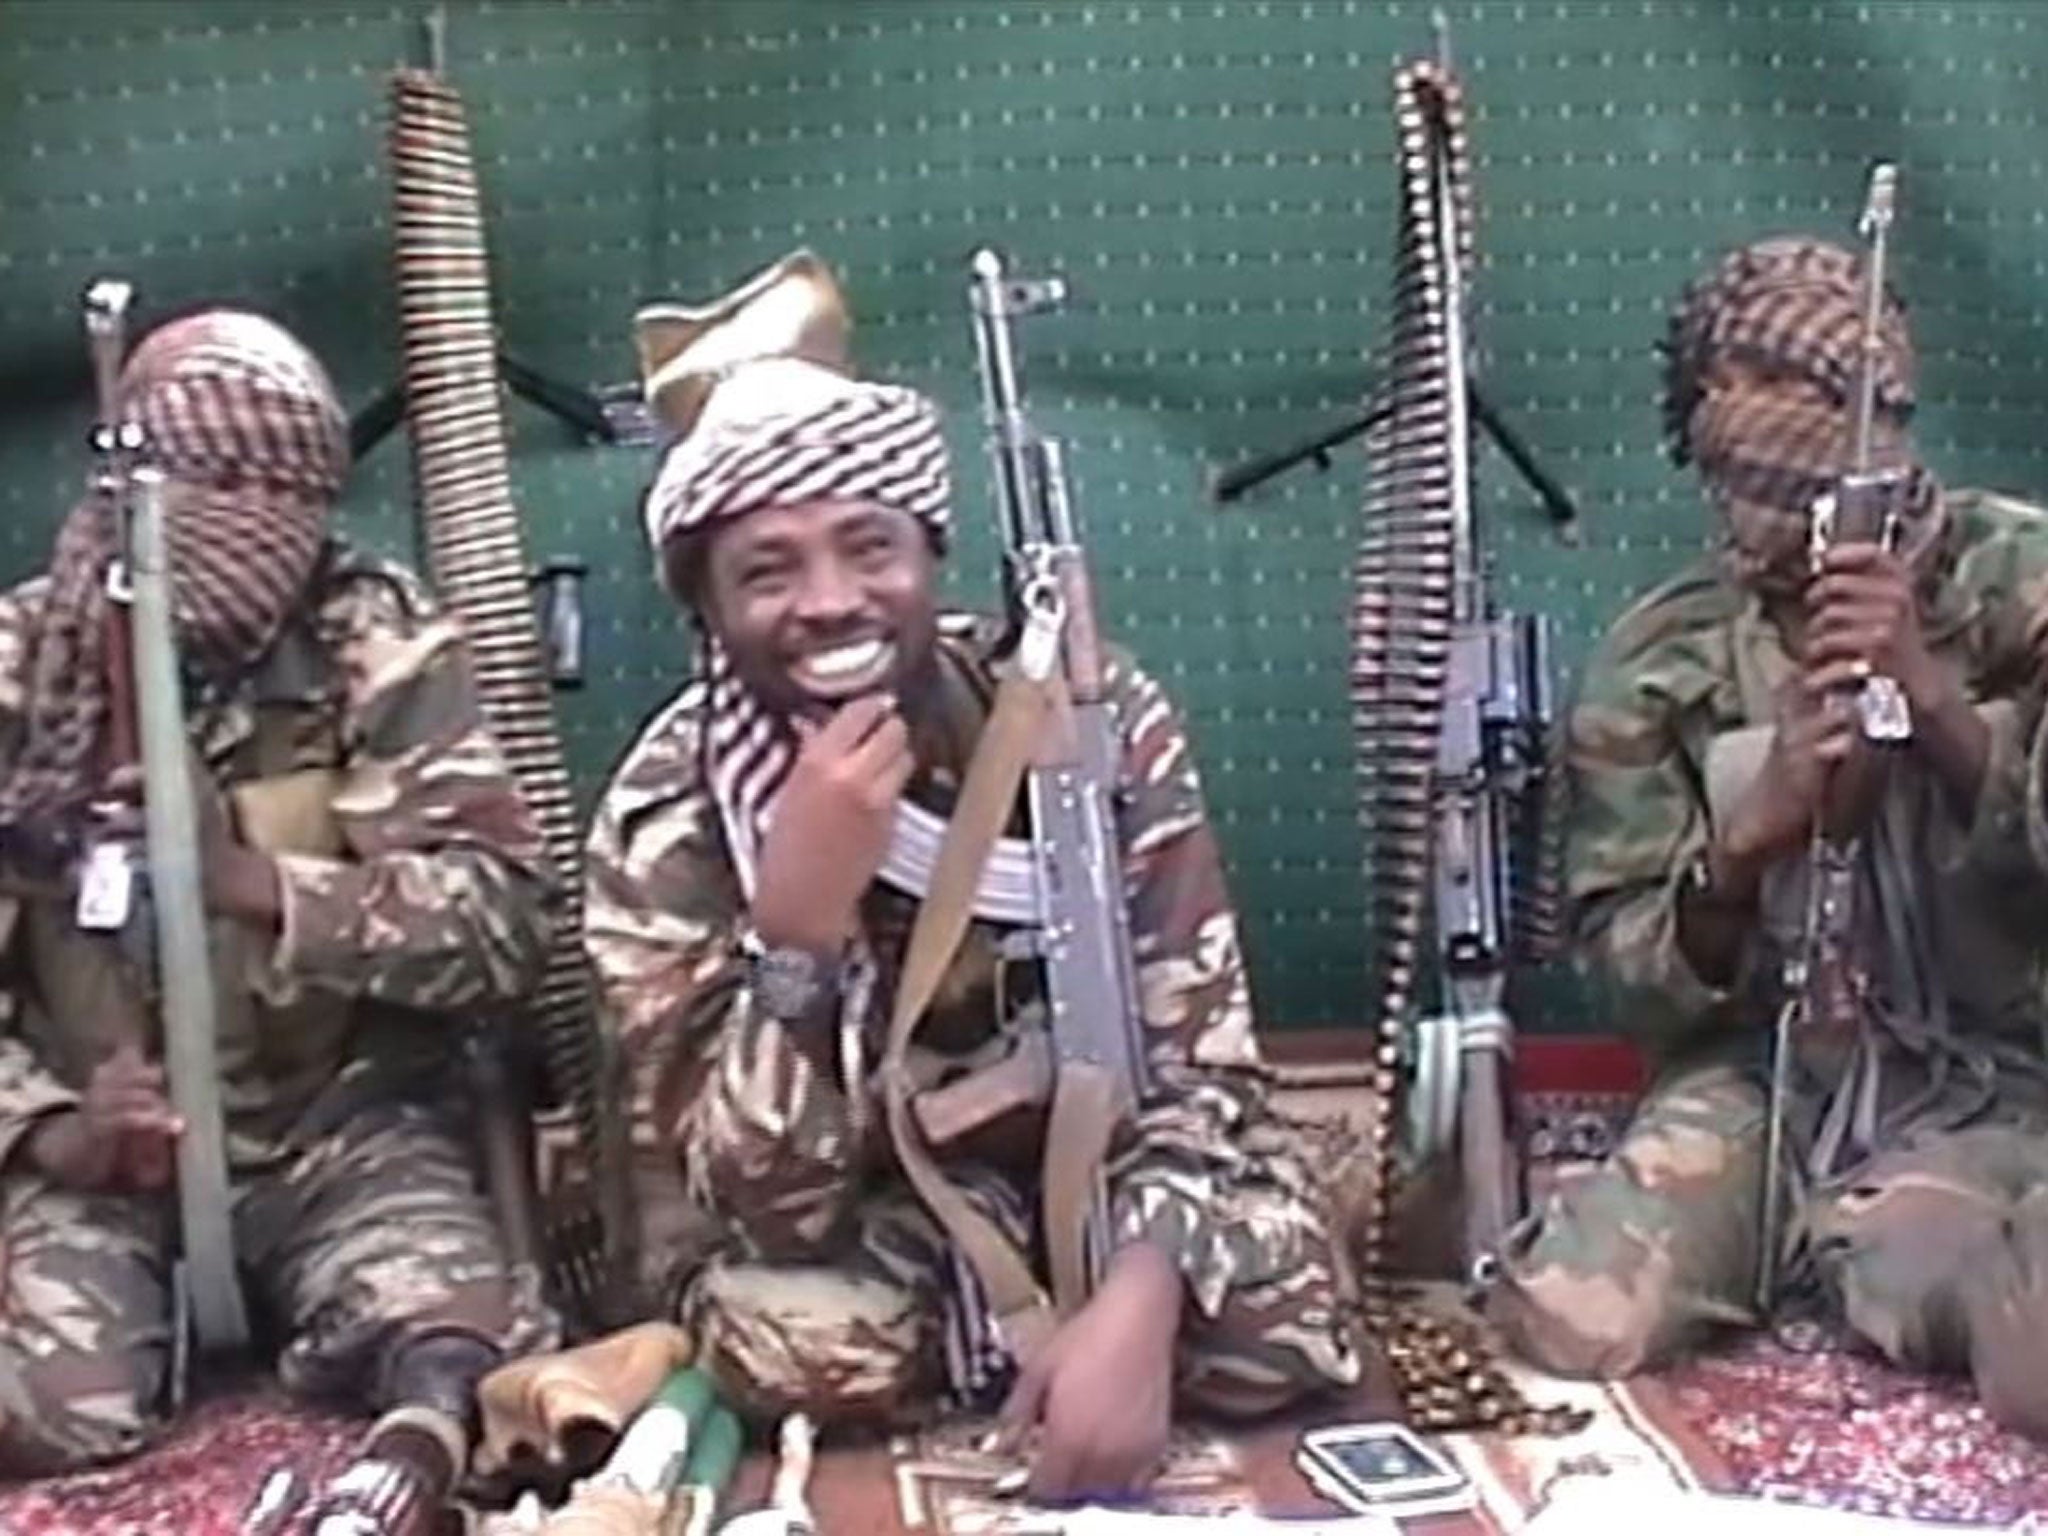 Video footage released last week appeared to show a man claiming to be Boko Haram's leader Abubakar Shekau